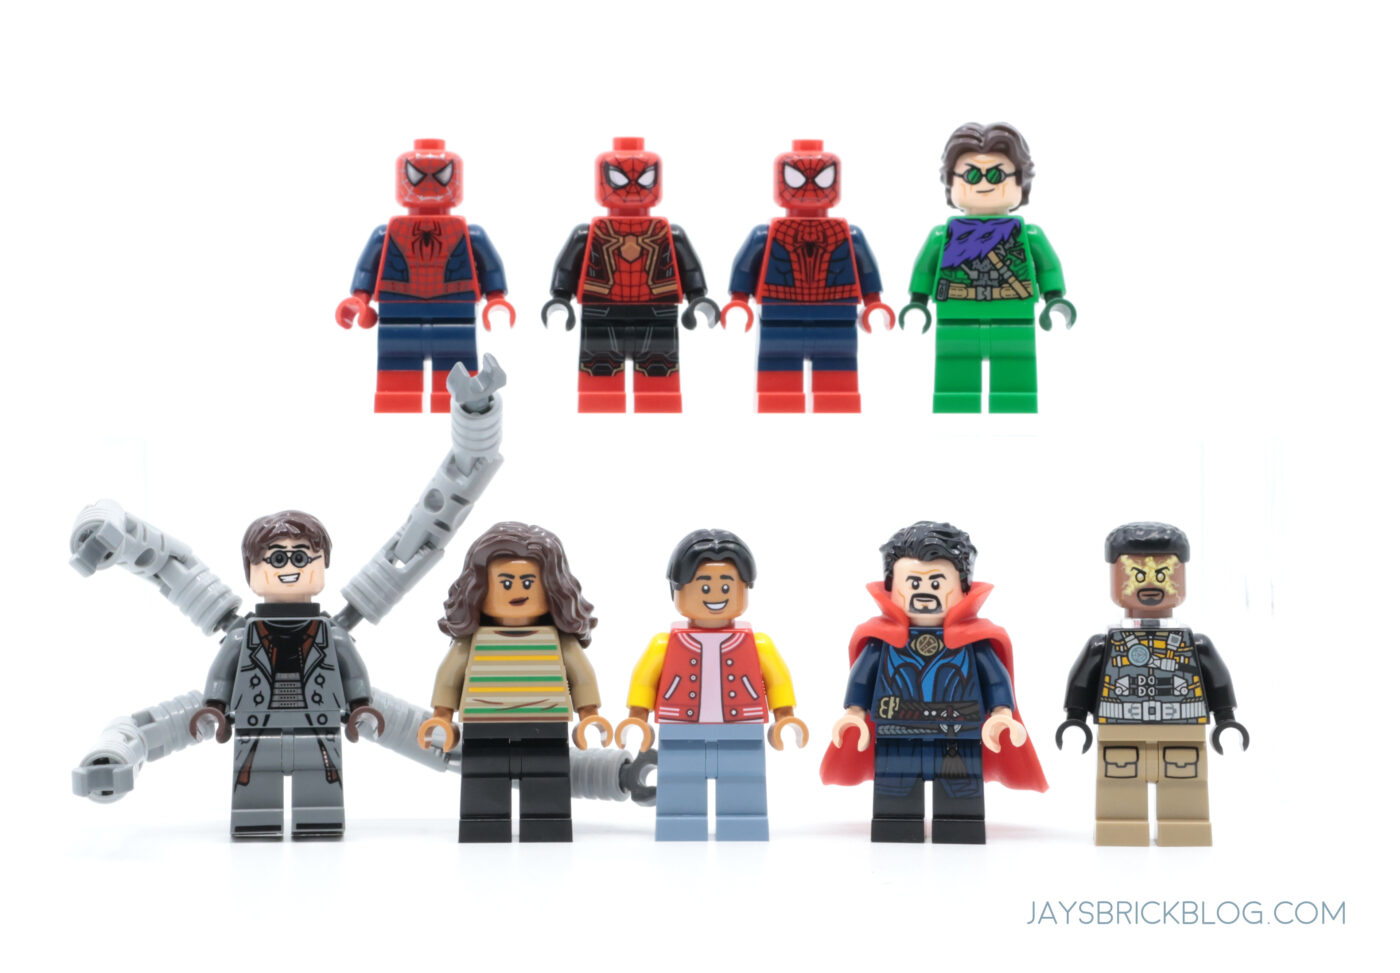 Review LEGO Spider-Man 2021 No Way Home : zoom sur les minifigs